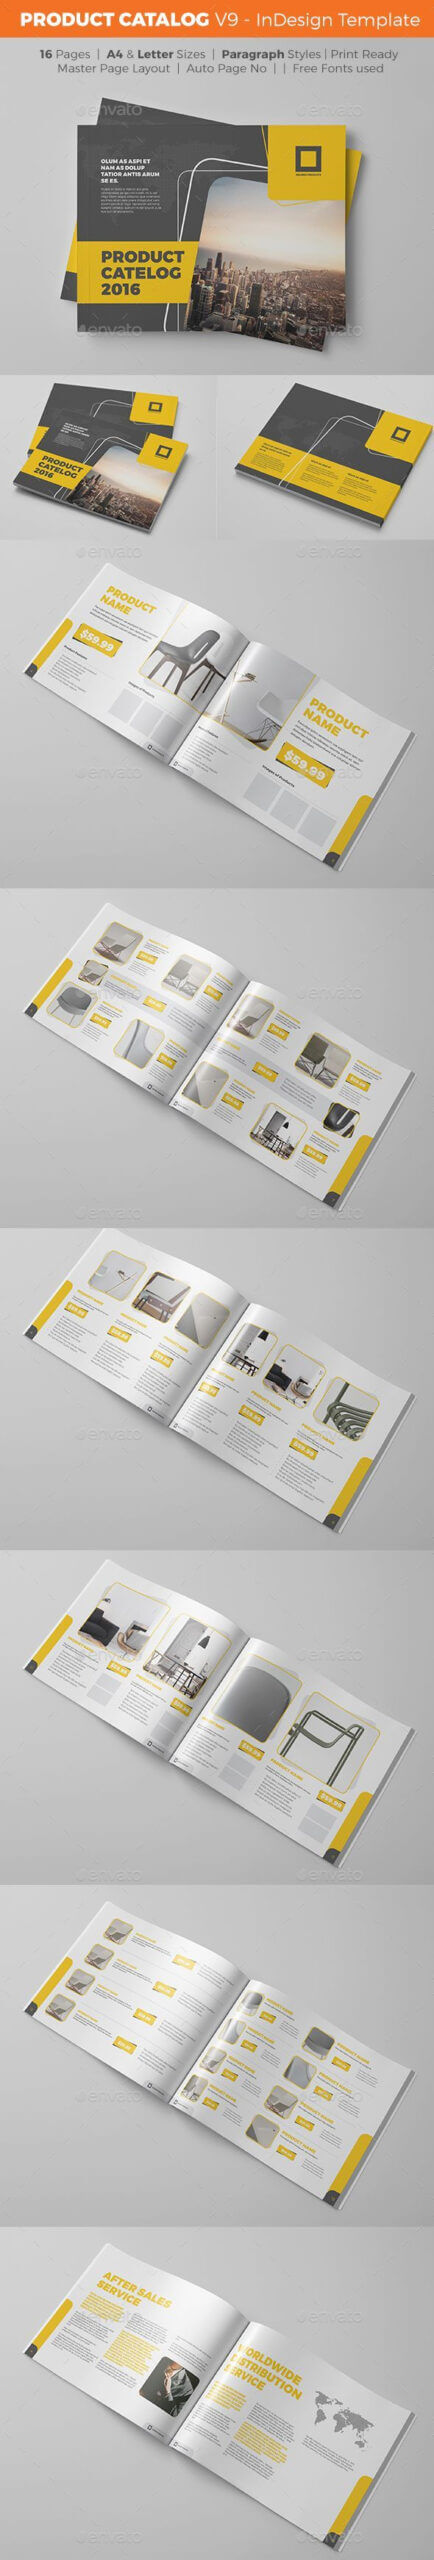 100+ Photo Realistic Corporate Brochure Template Designs Throughout 6 Panel Brochure Template